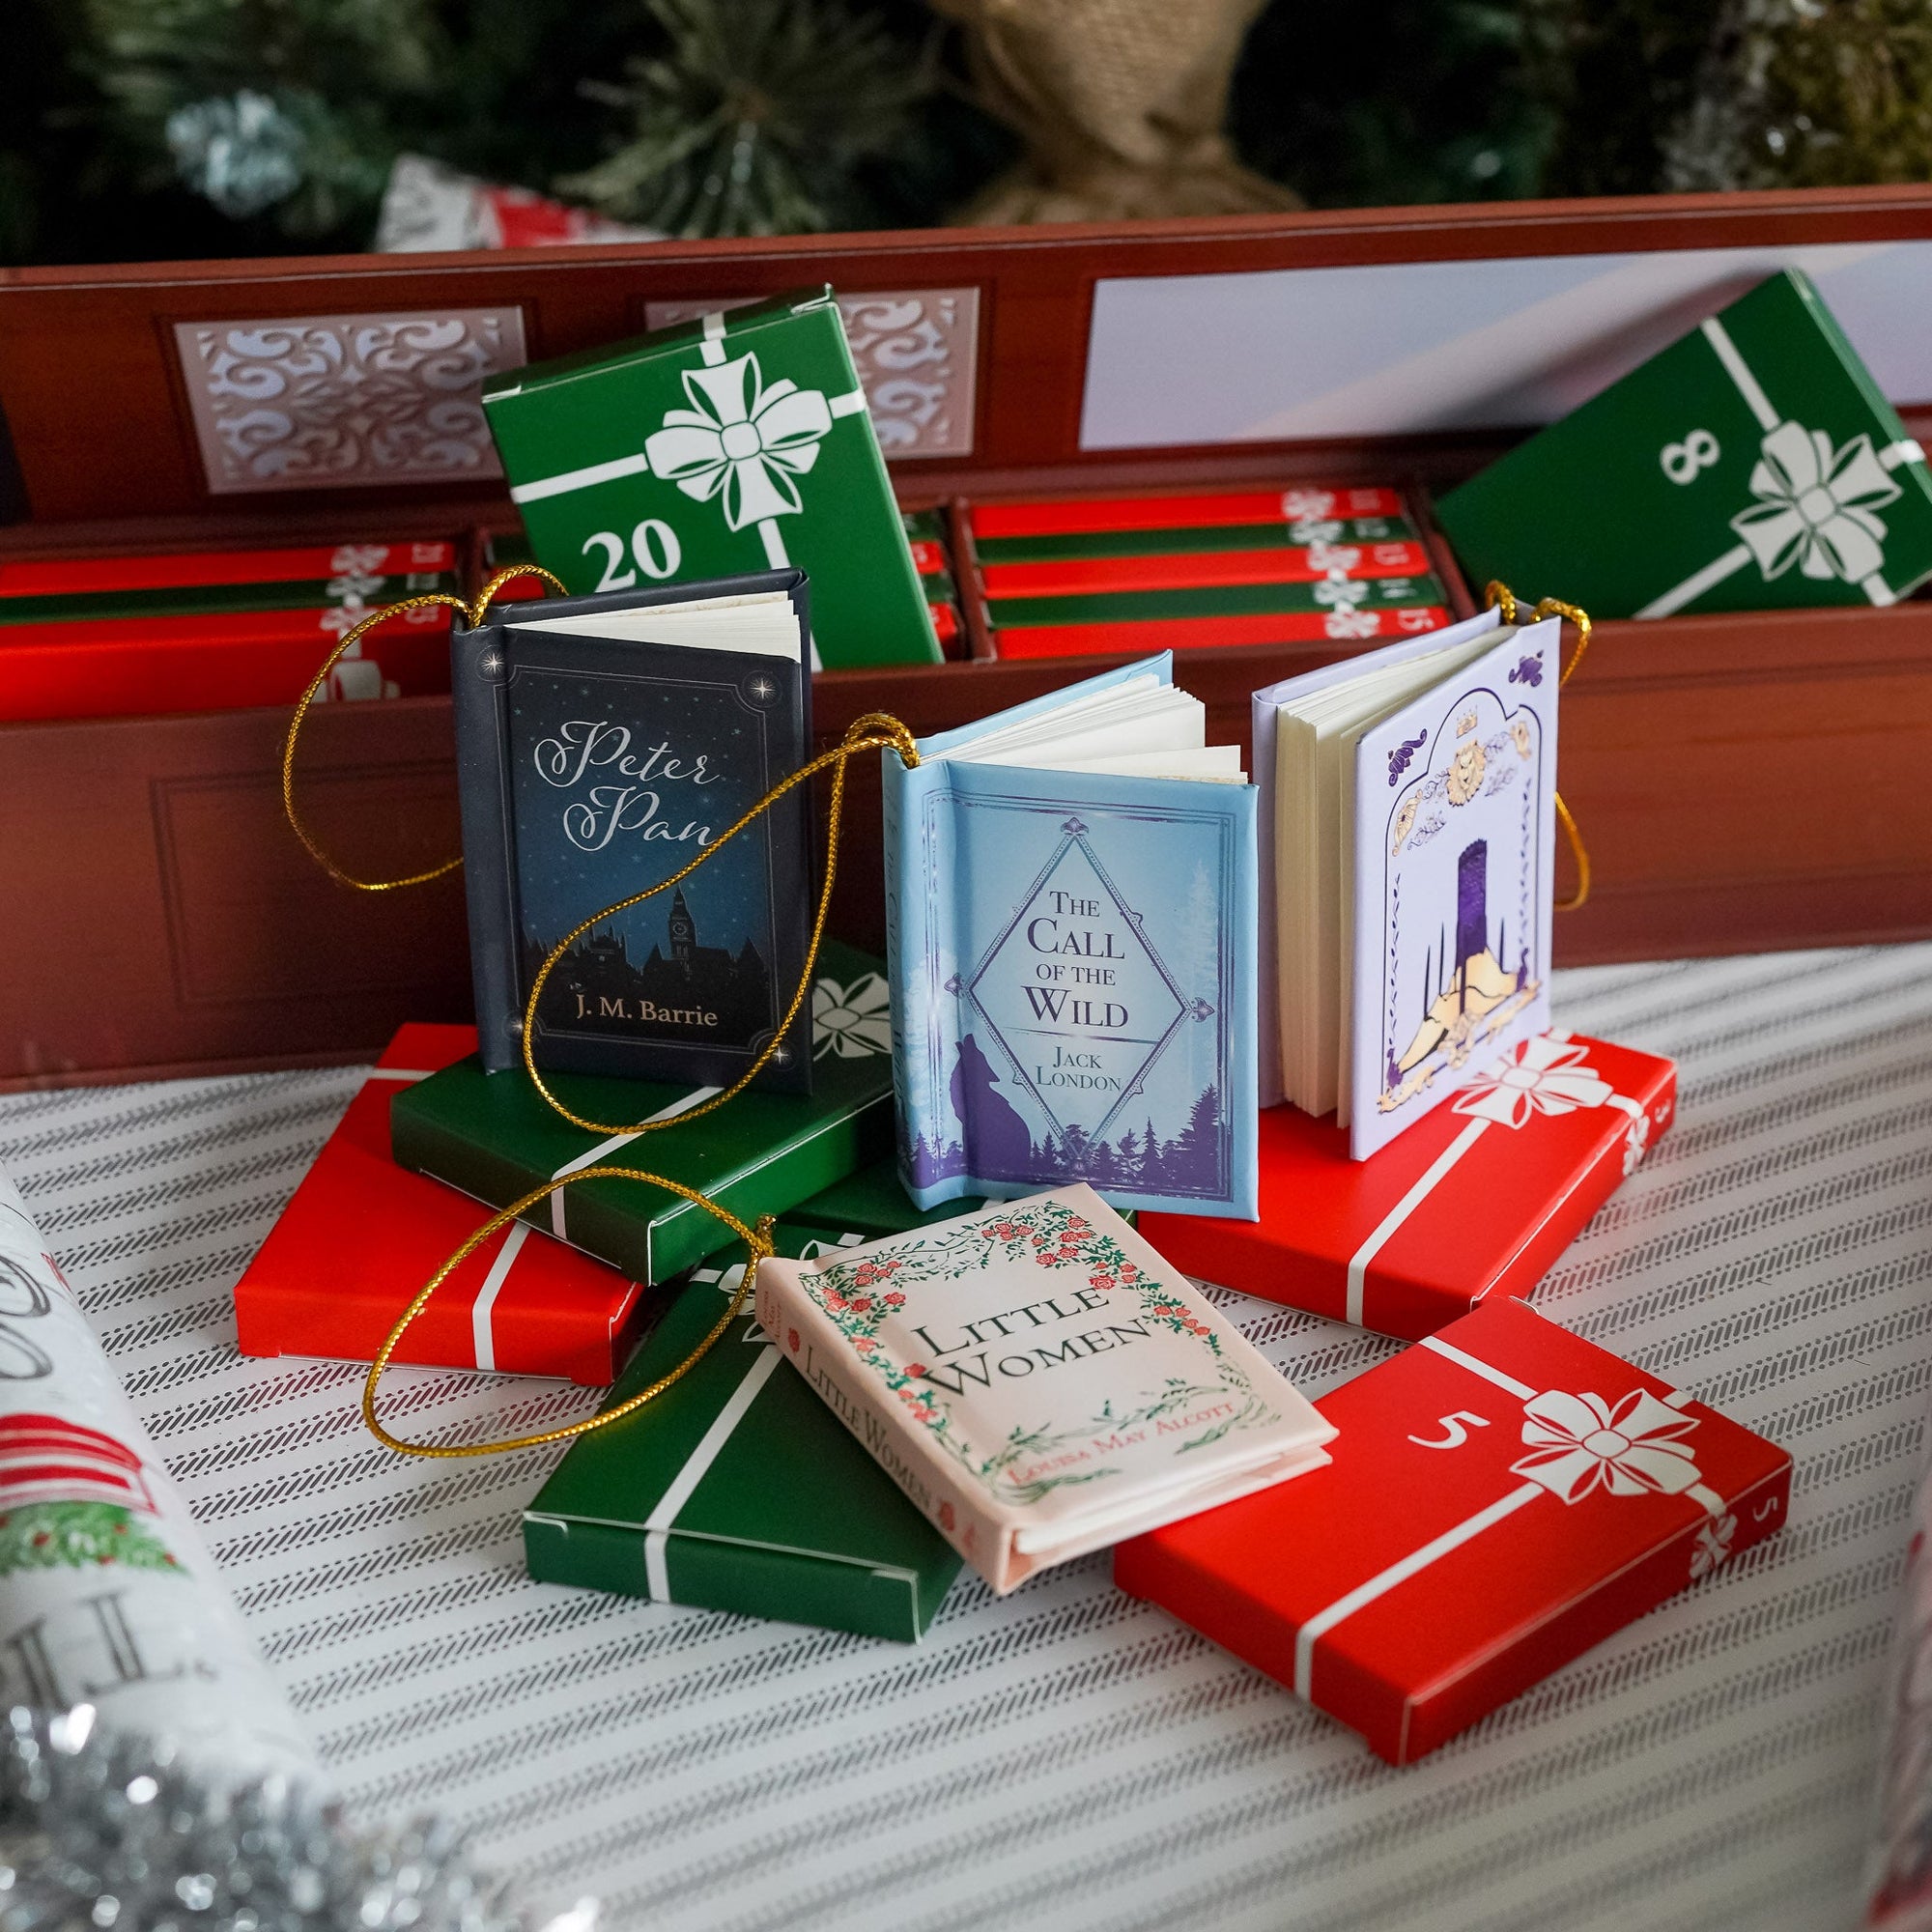 Mini Classic Literature Book Ornament Advent Calendar with 25 tiny books by classic authors